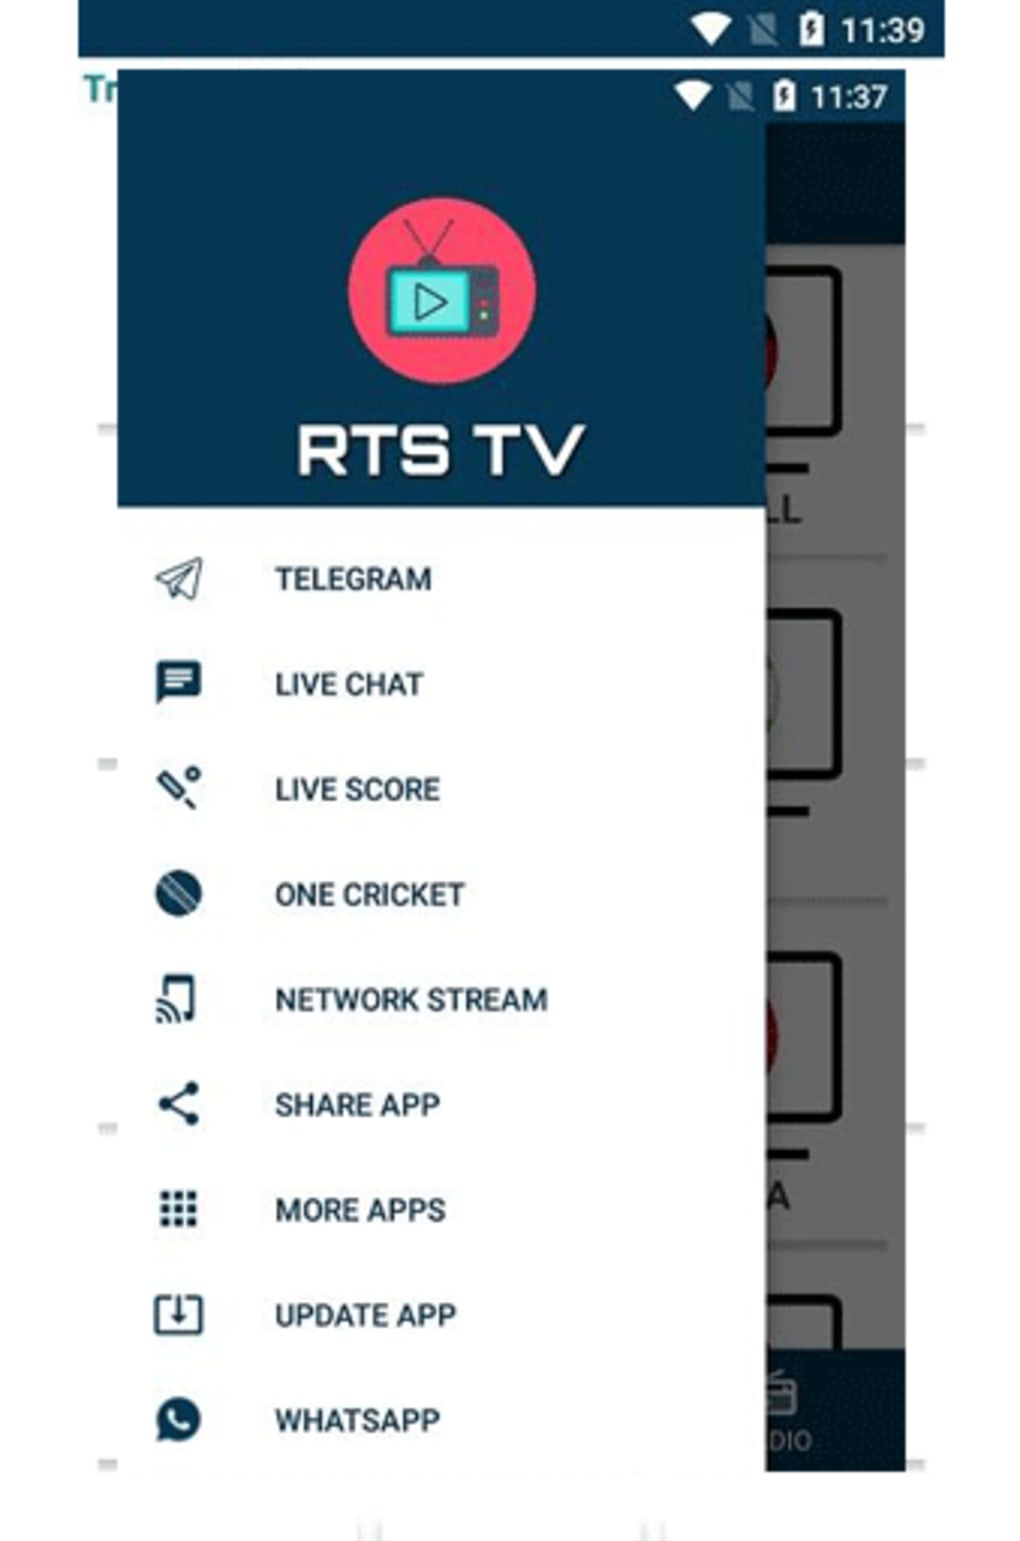 RTS TV v9.70 Live IPL 2022 for Android